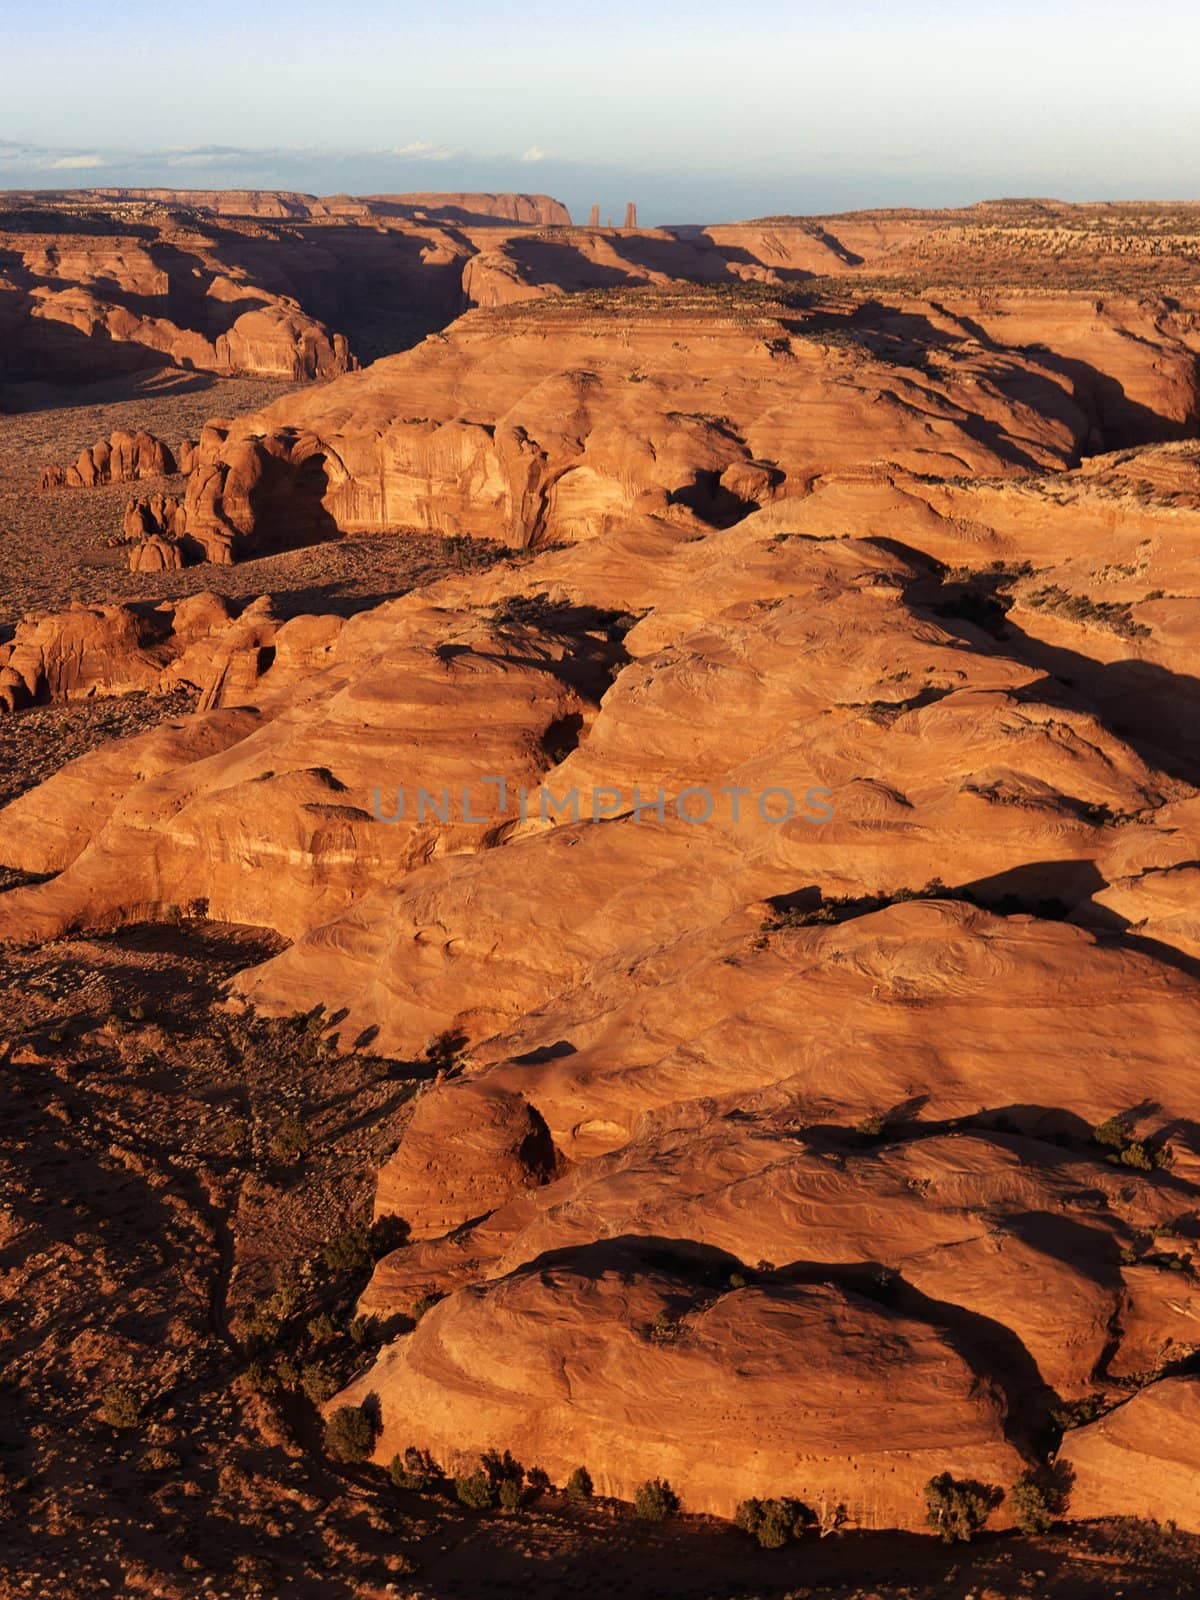 Scenic landscape of rock formations in Canyonlands, Canyonlands National Park, Utah, United States.